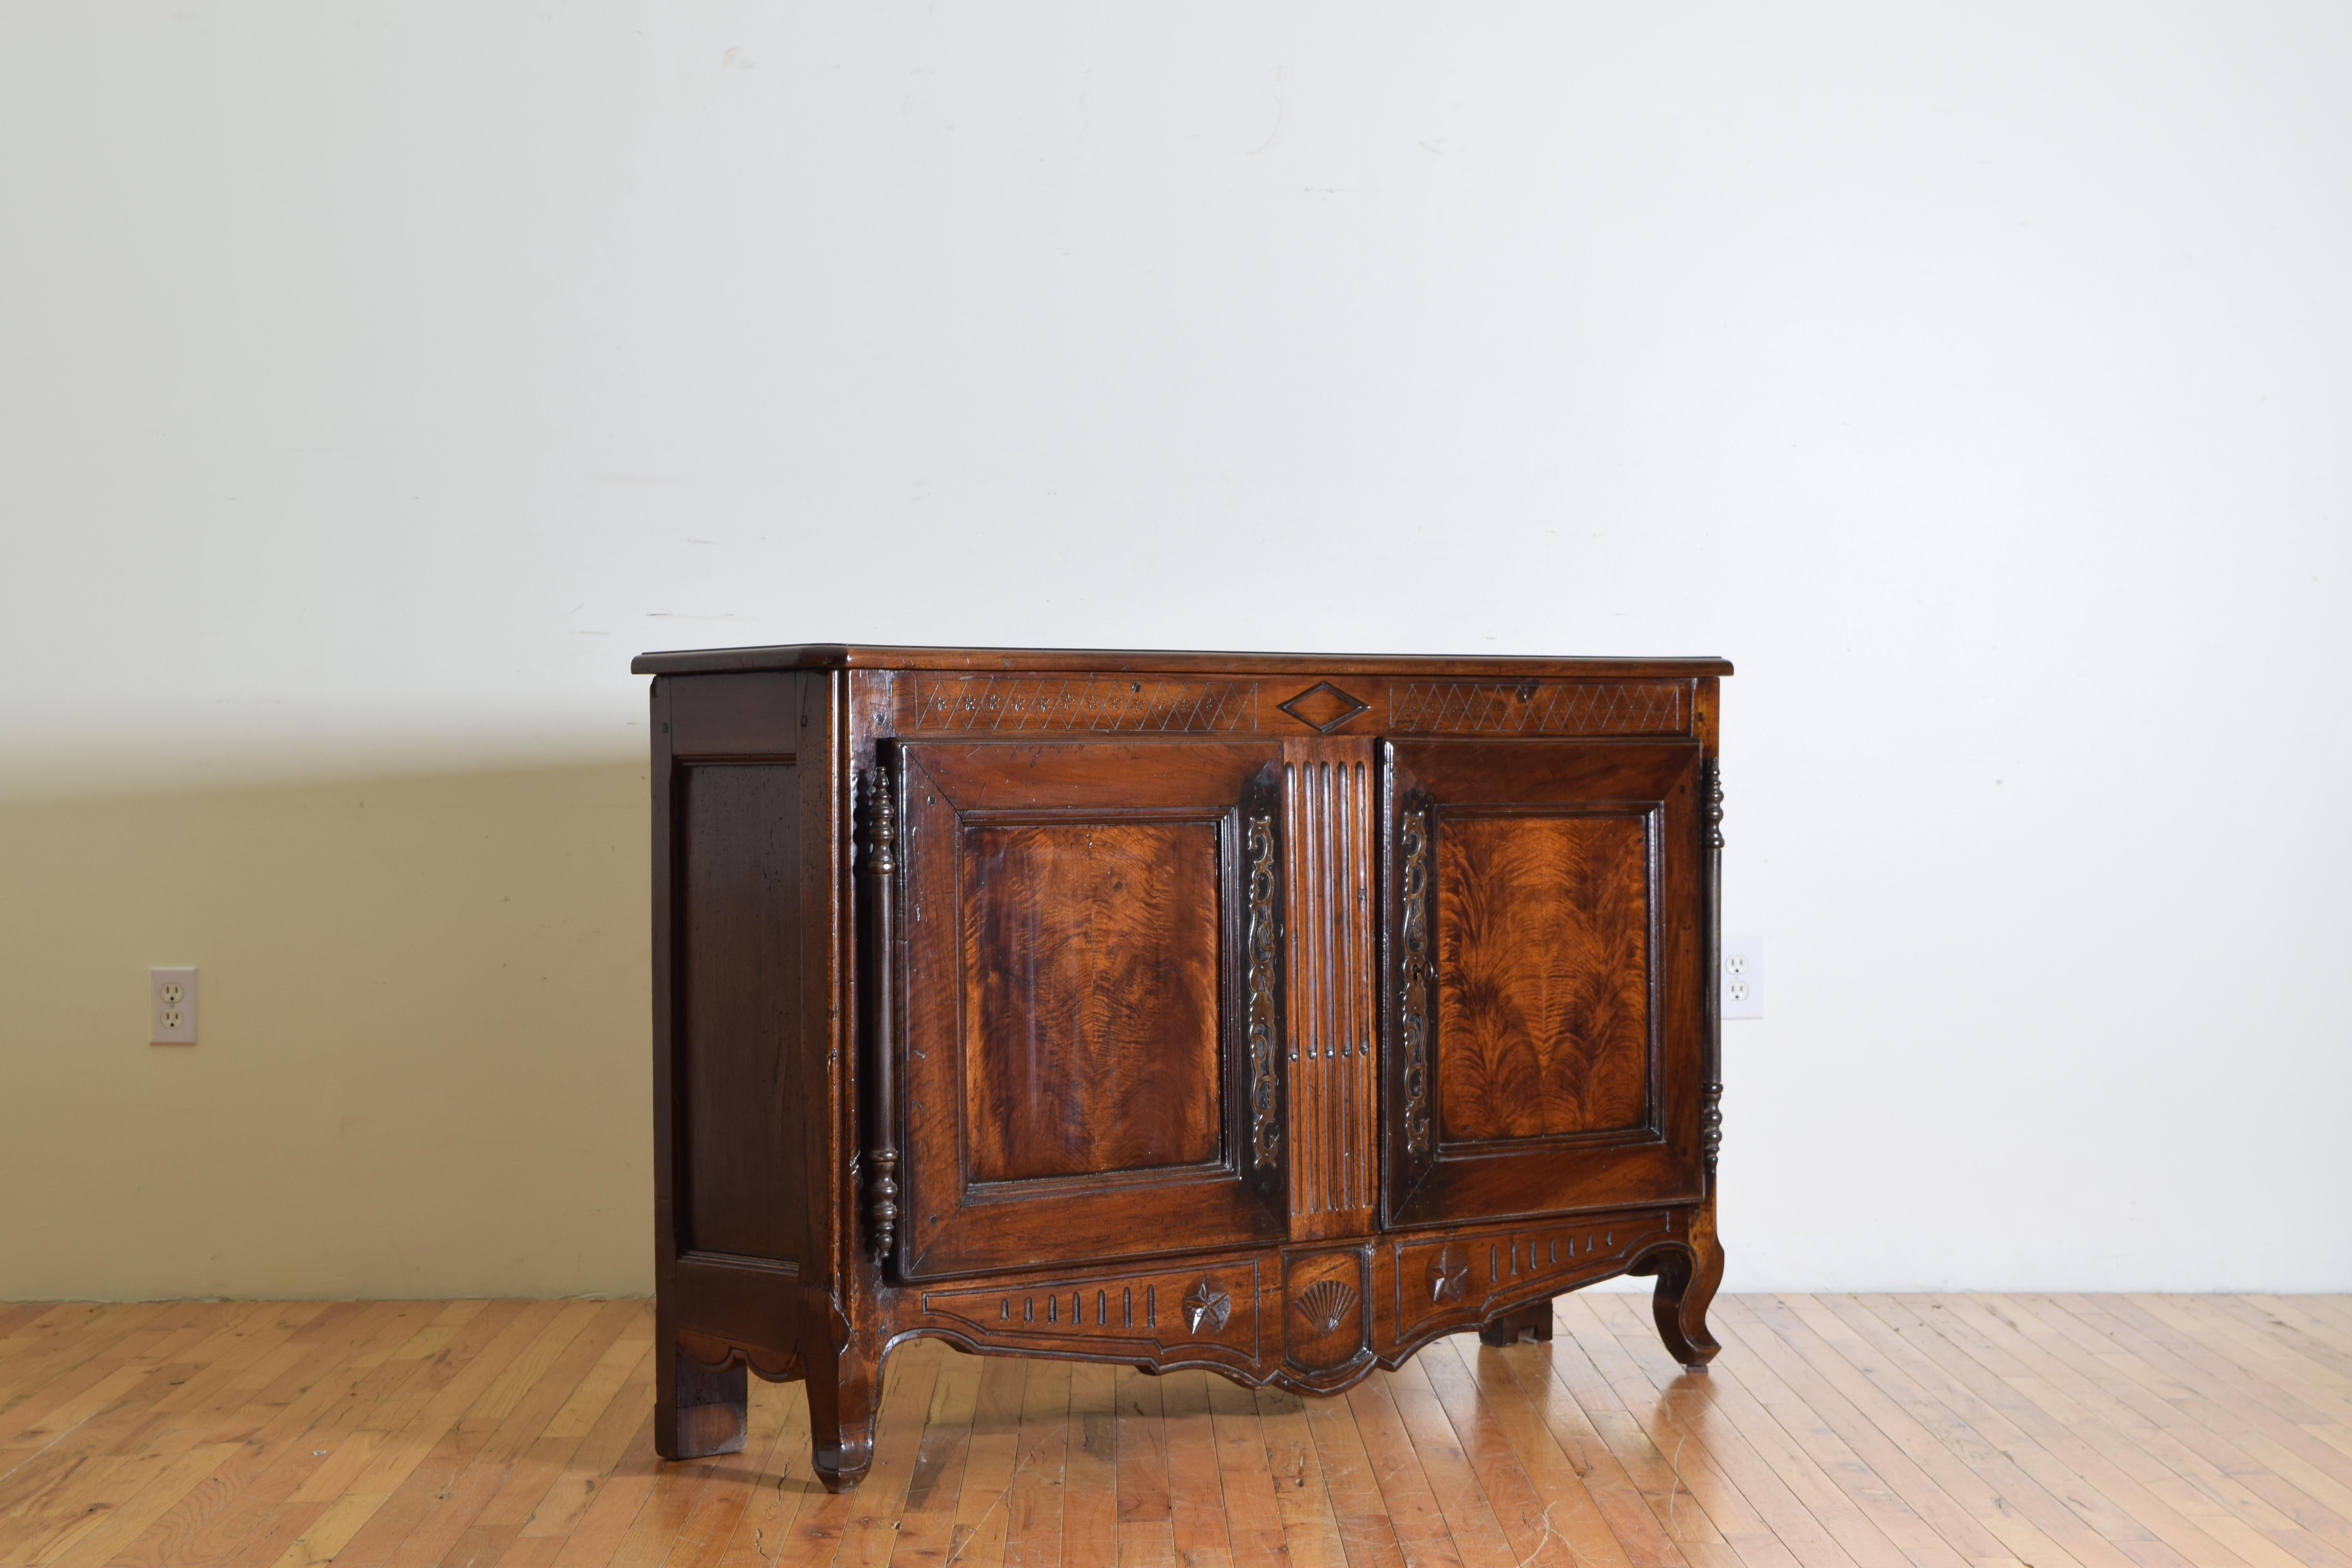 Having a rectangular top with canted front corners above a conforming case with two doors mounted on large steel hinges, upper diagonal carvings with a centered horizontal lozenge, matched veneer paneled doors, the center section with vertical